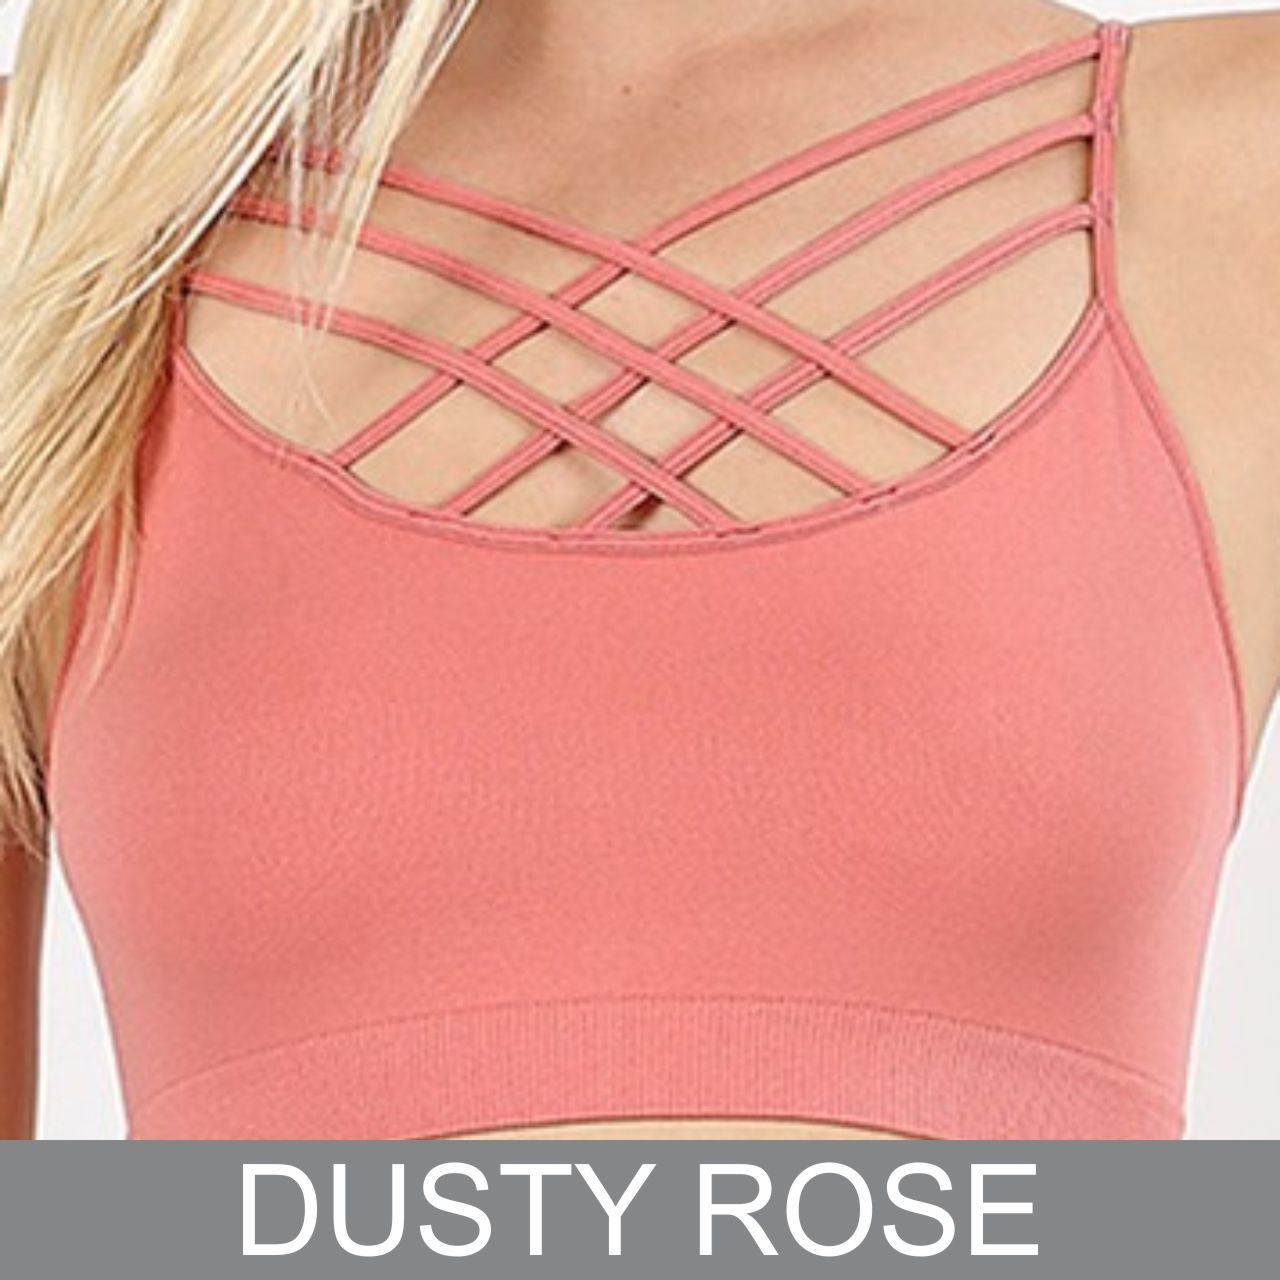 Criss-Cross Bralette - The Graphic Tee